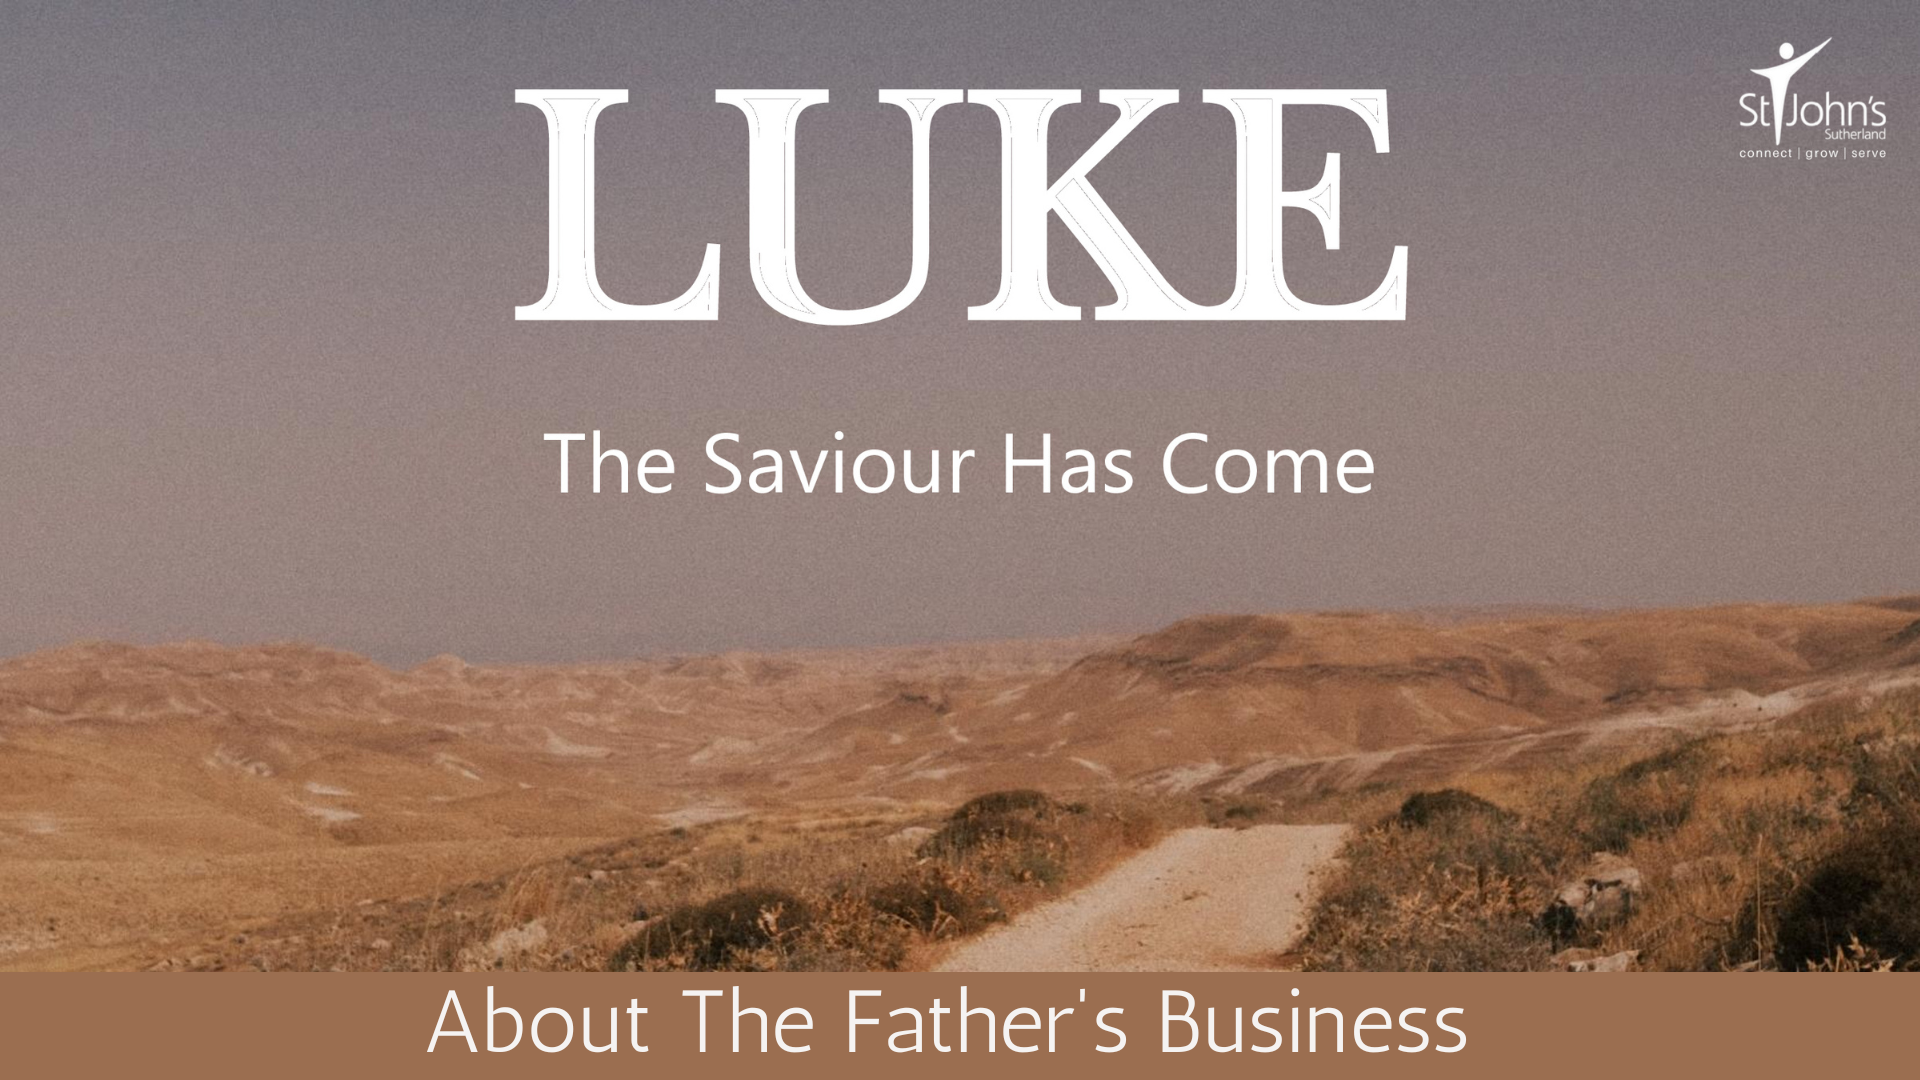 About The Father’s Business